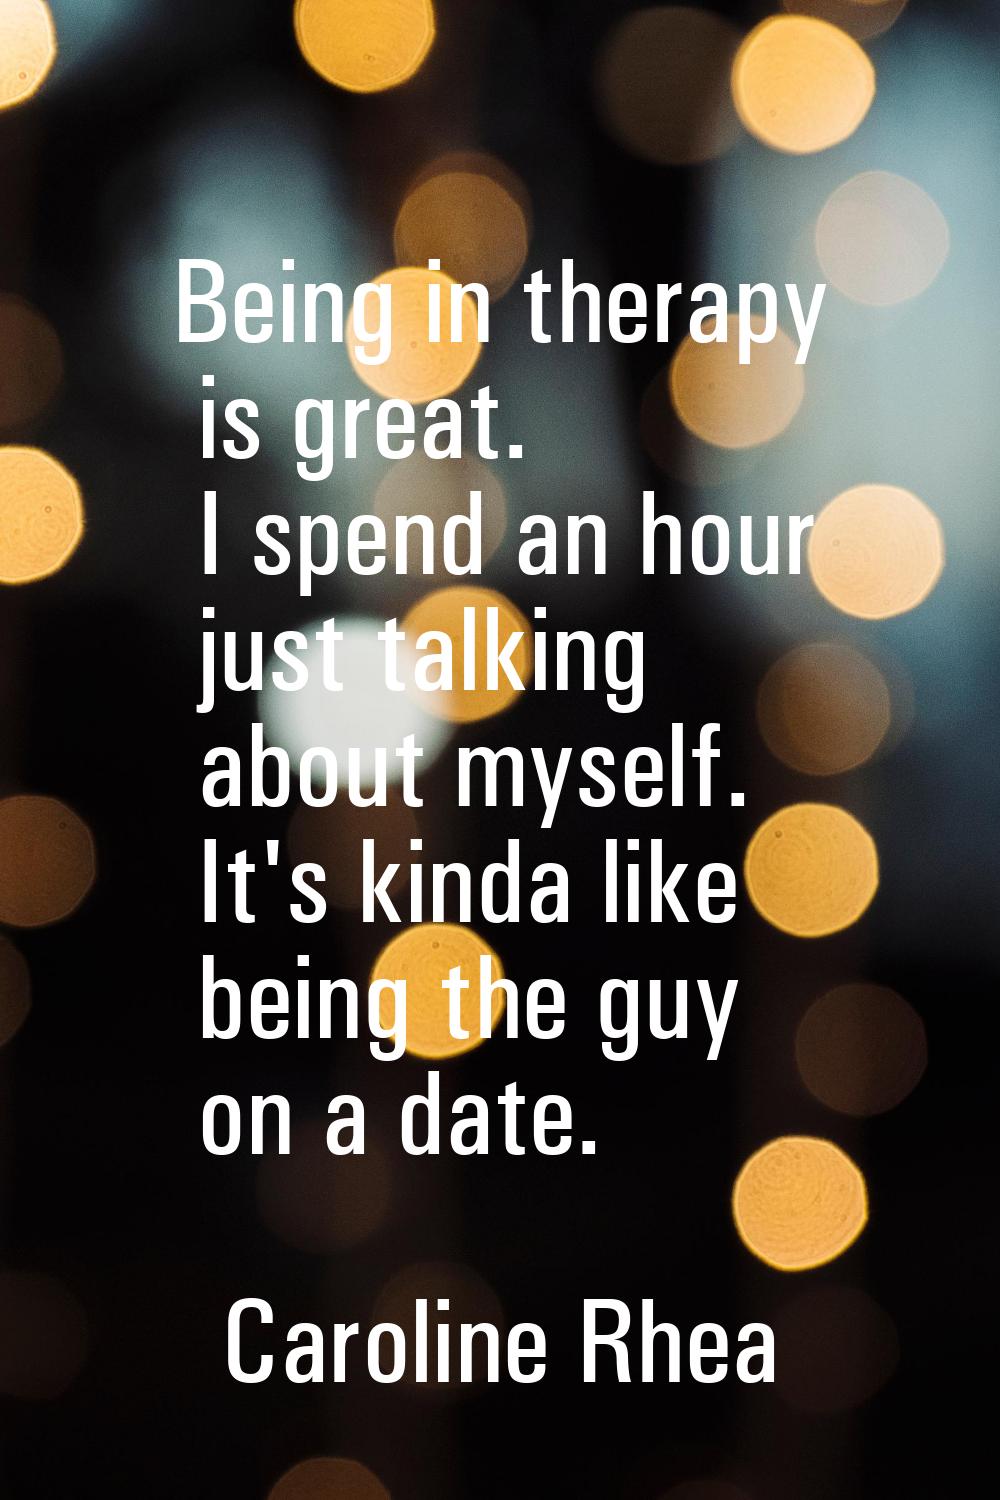 Being in therapy is great. I spend an hour just talking about myself. It's kinda like being the guy